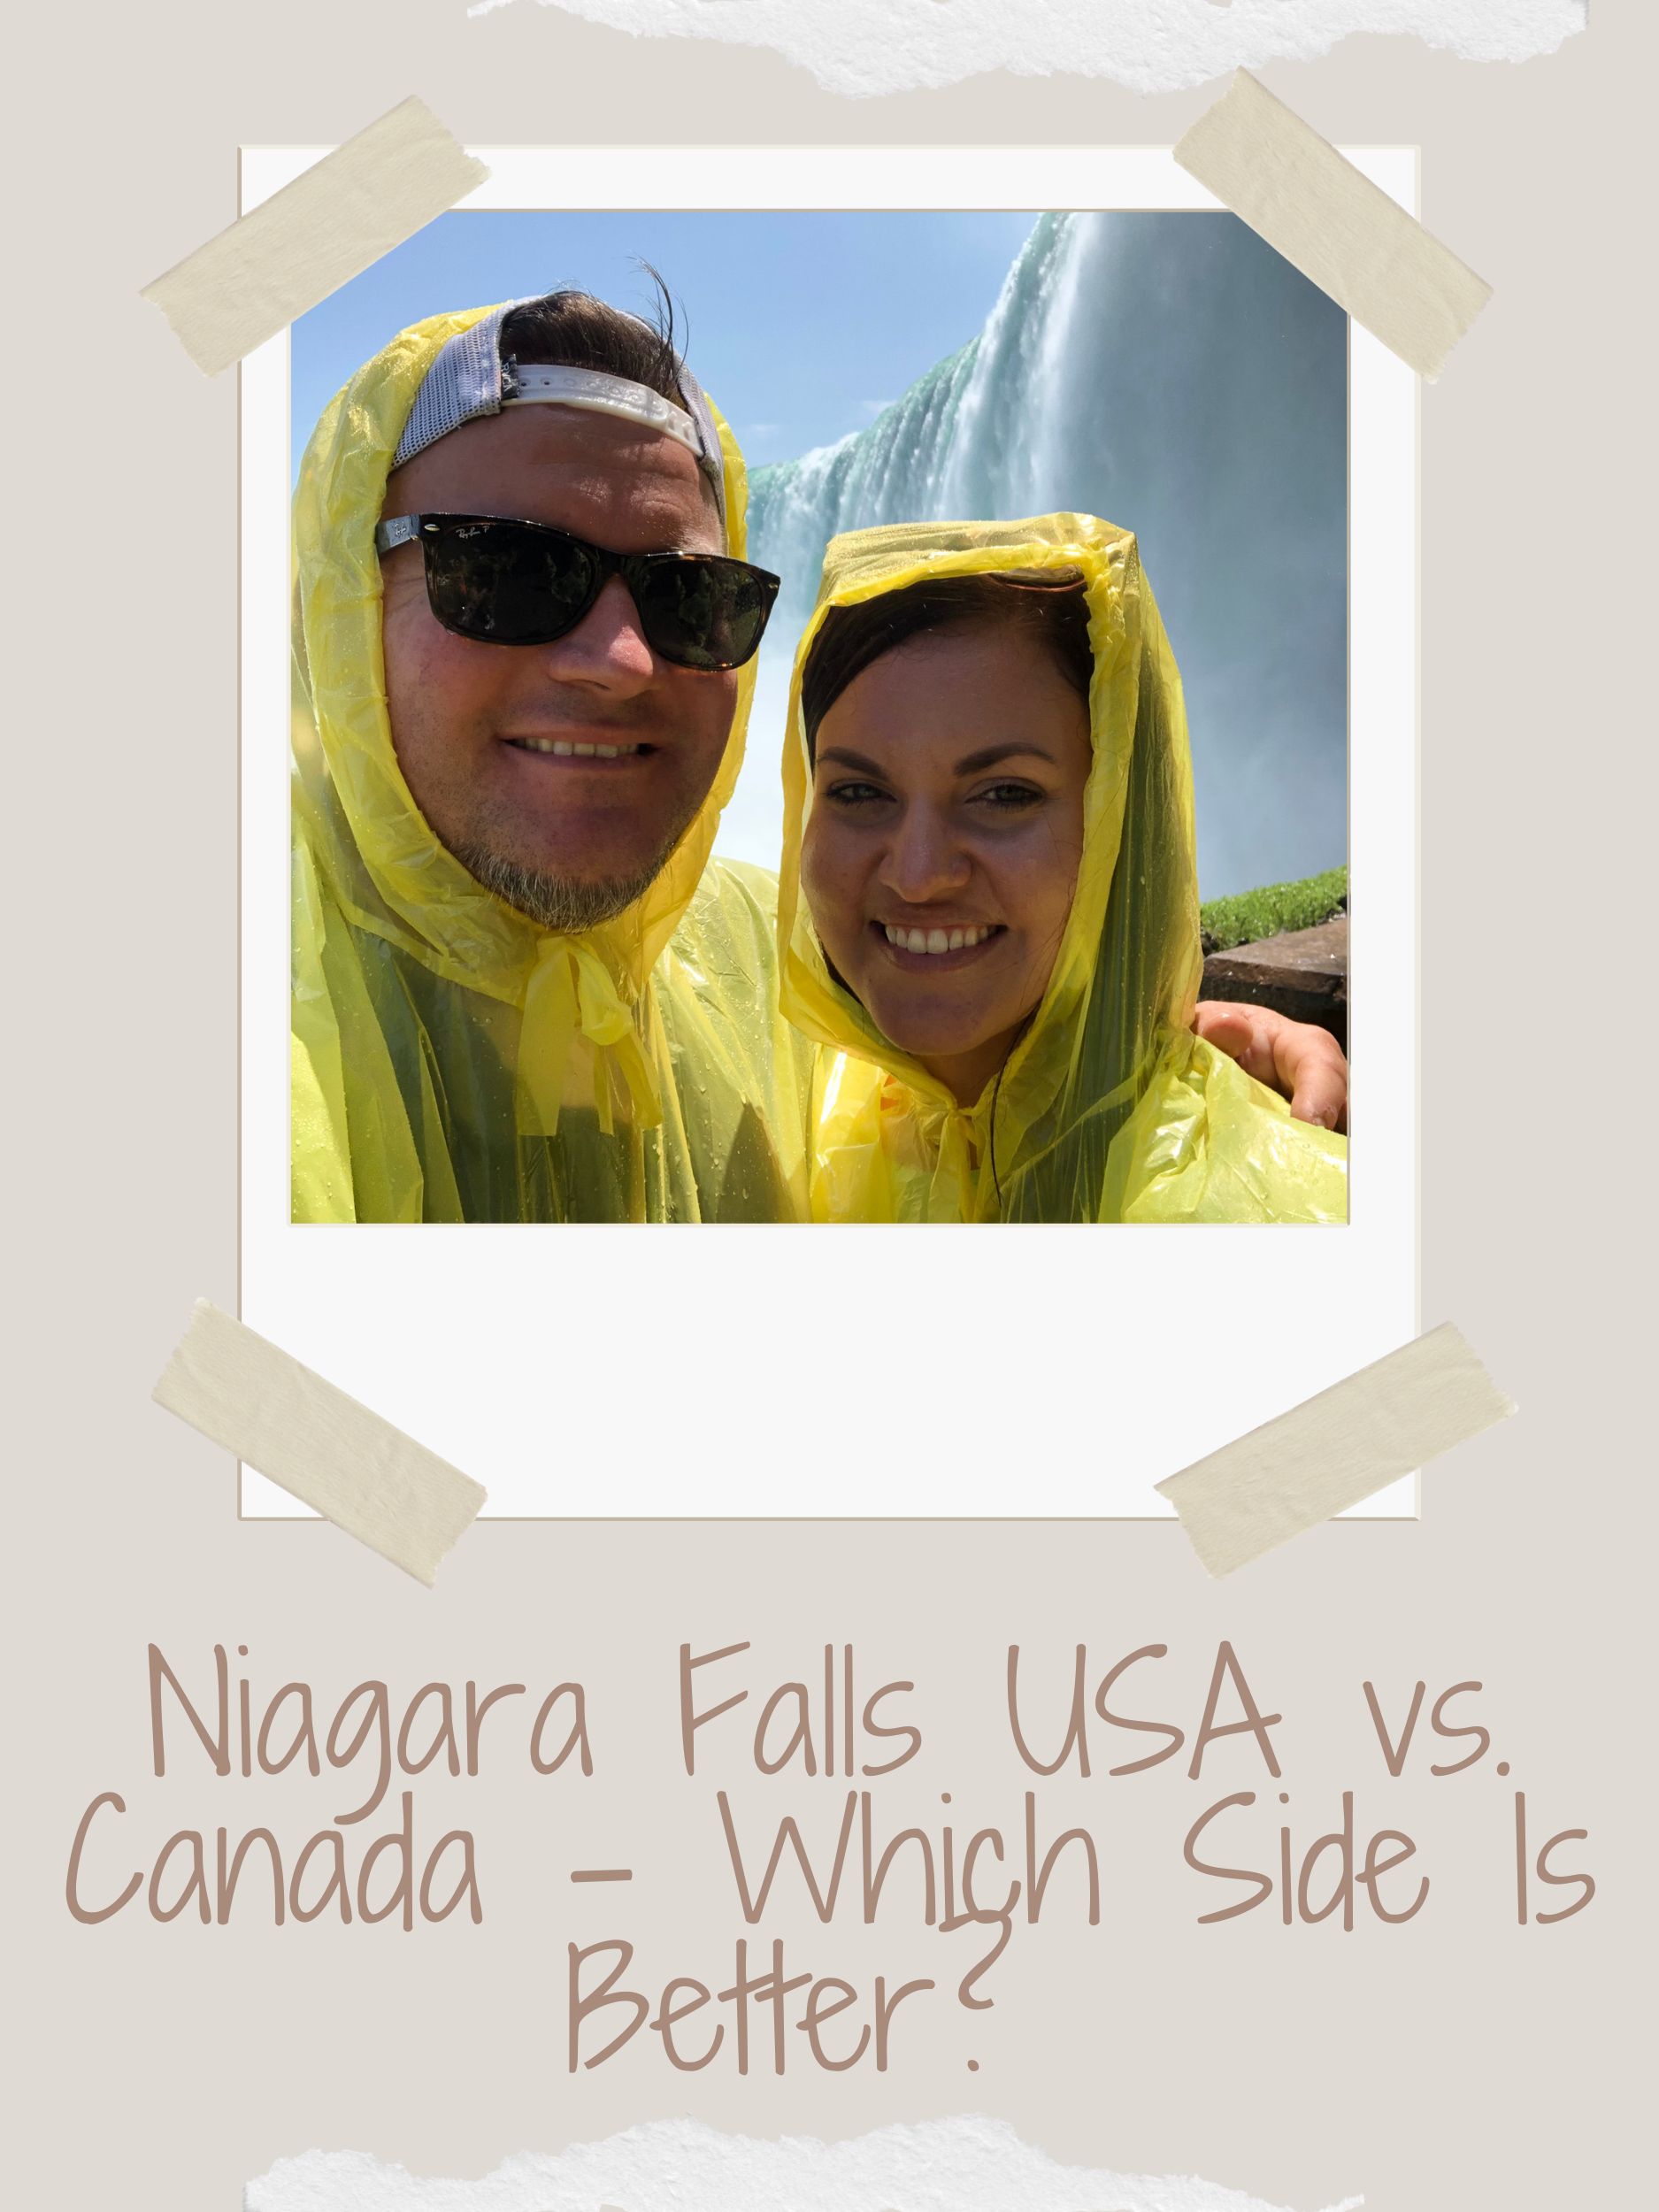 Niagara Falls USA vs Canada – Which Side Is Better?